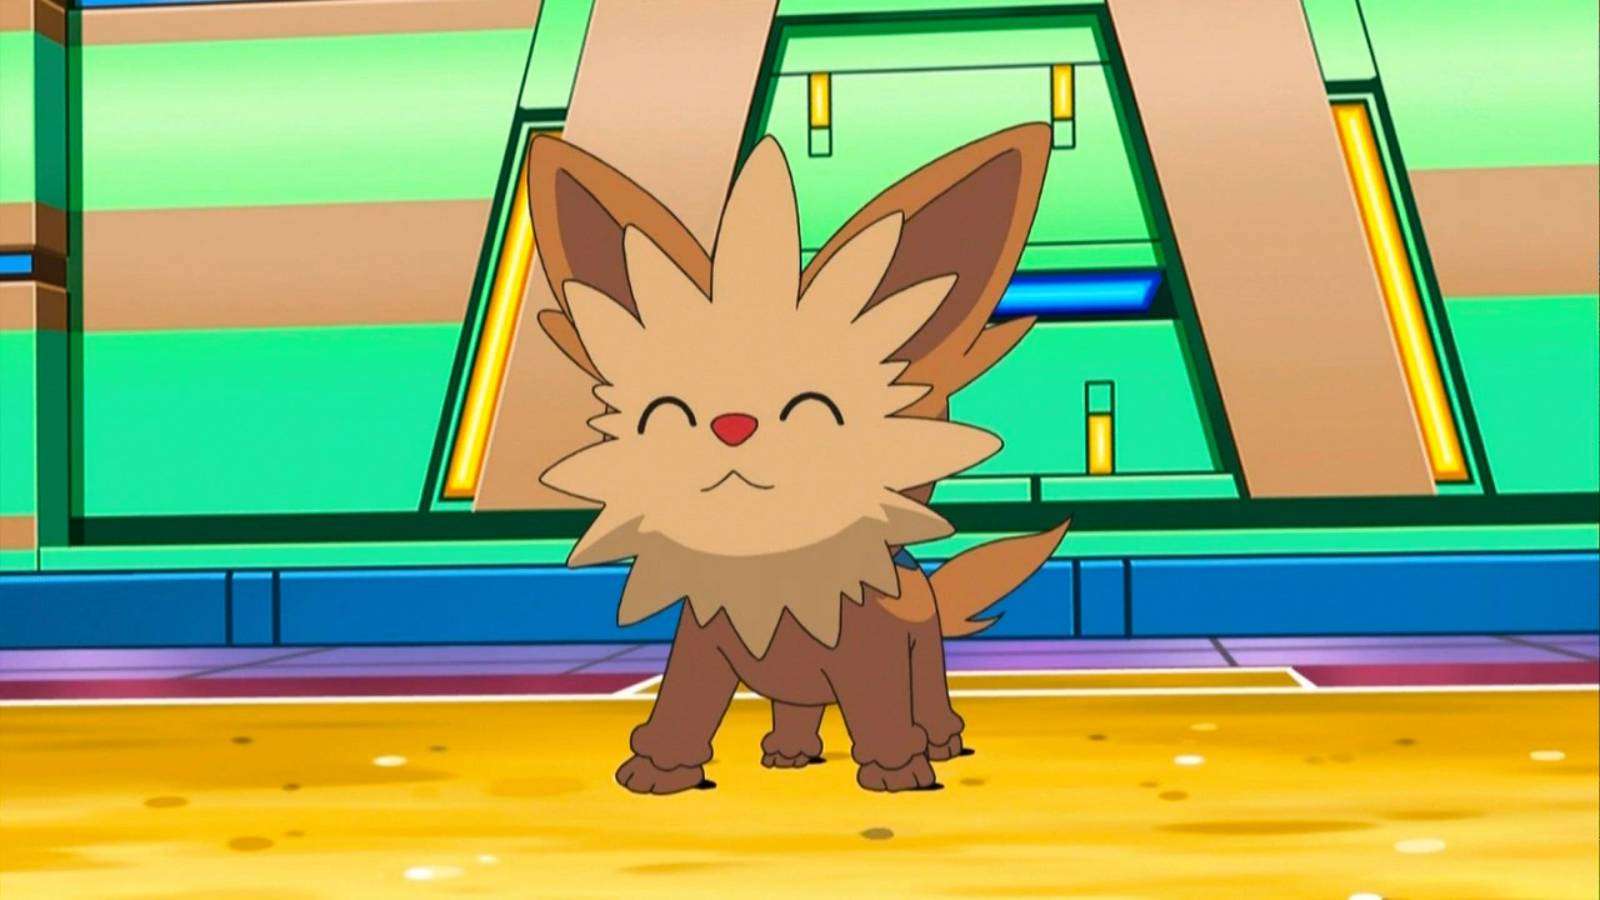 An animated scene shows the puppy Pokemon Lillipup standing in a battle arena, smiling sincerely